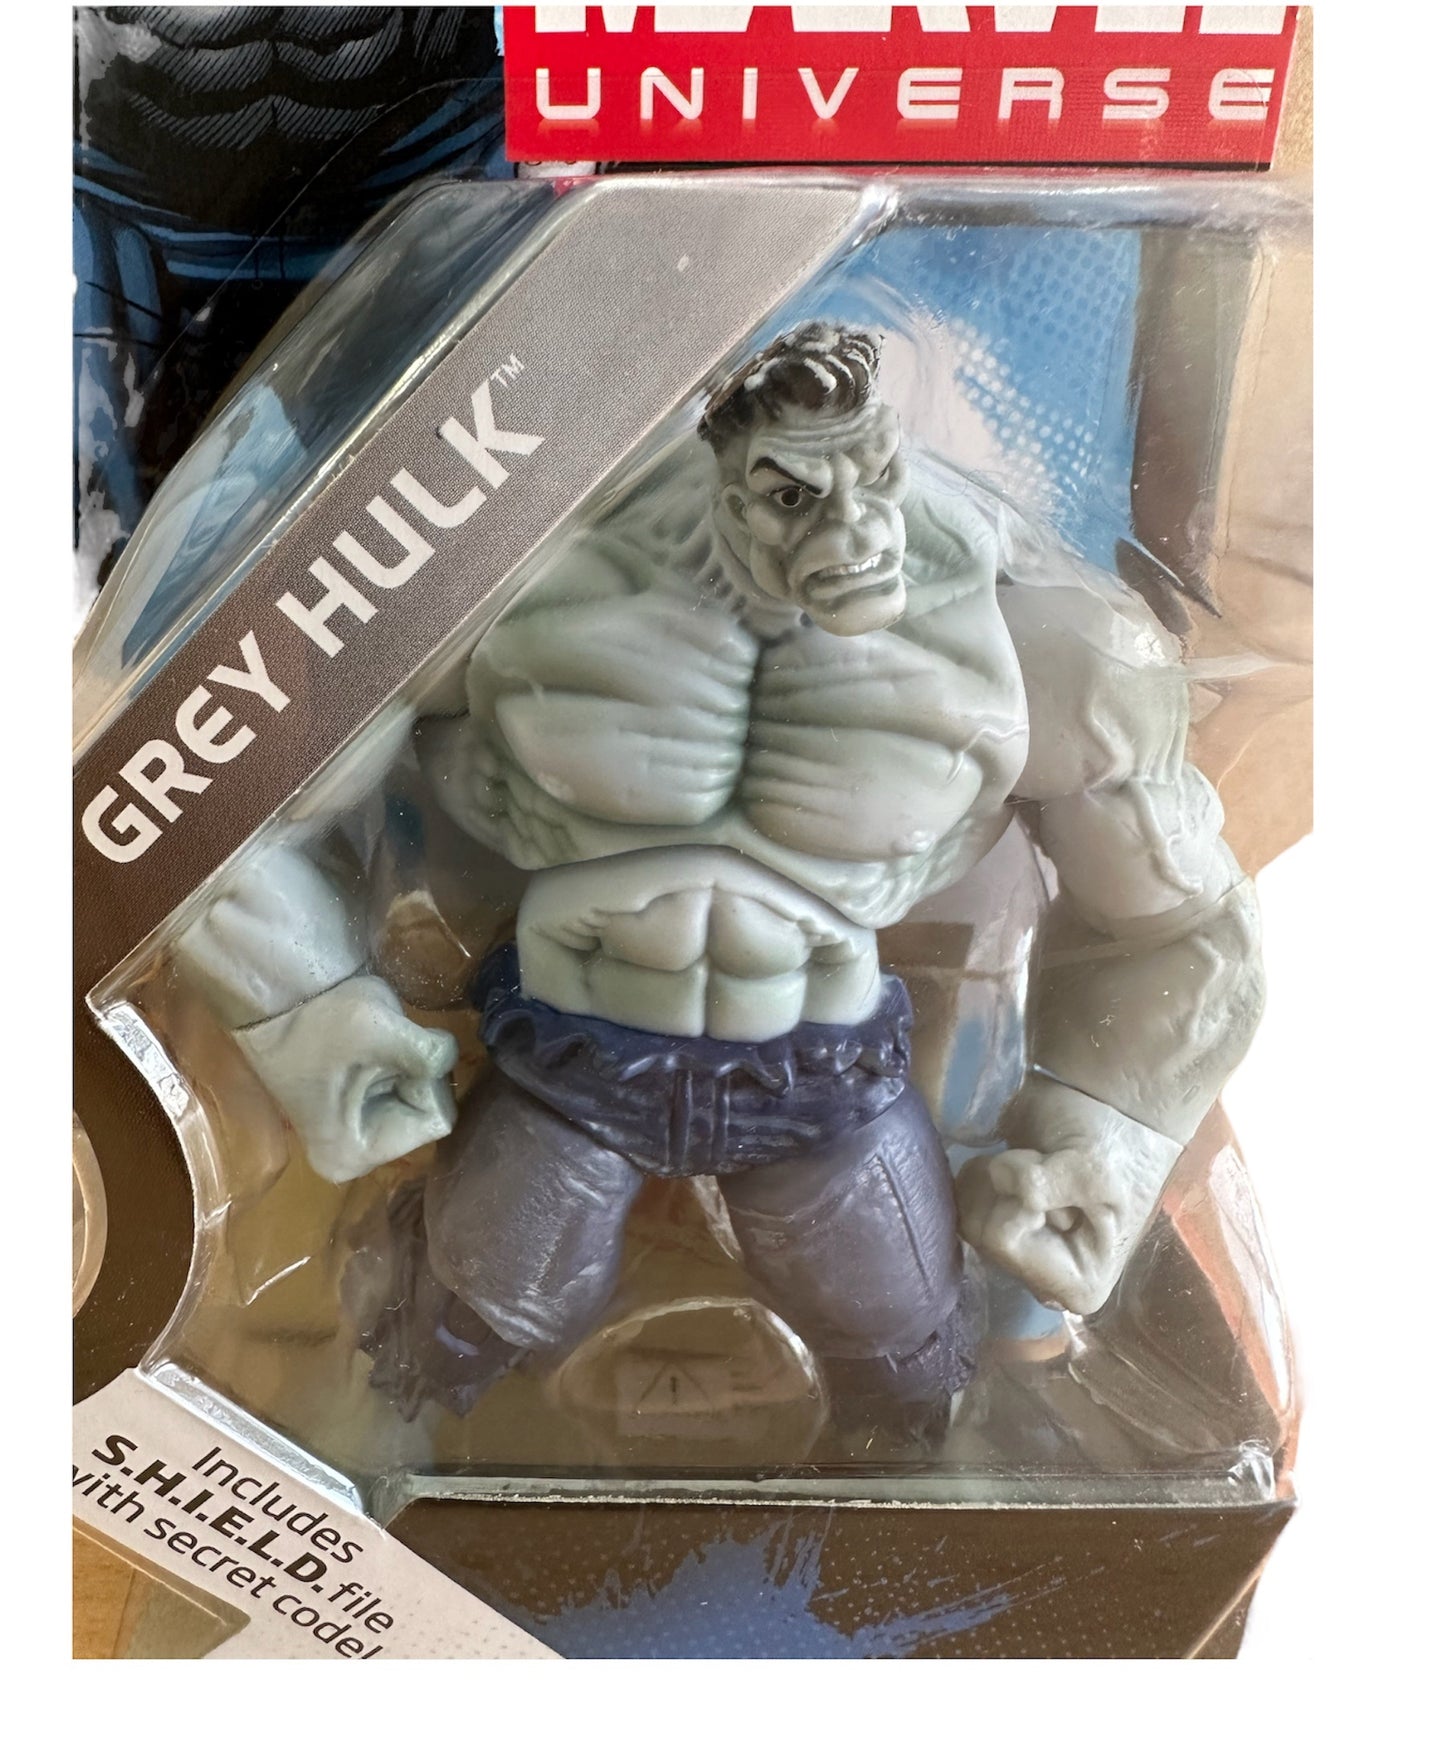 Vintage 2008 Marvel Universe Series 1 - No. 014 Grey Hulk 3 3/4 Inch Action Figure With SHIELD File And Secret Code - Brand New Factory Sealed Shop Stock Room Find